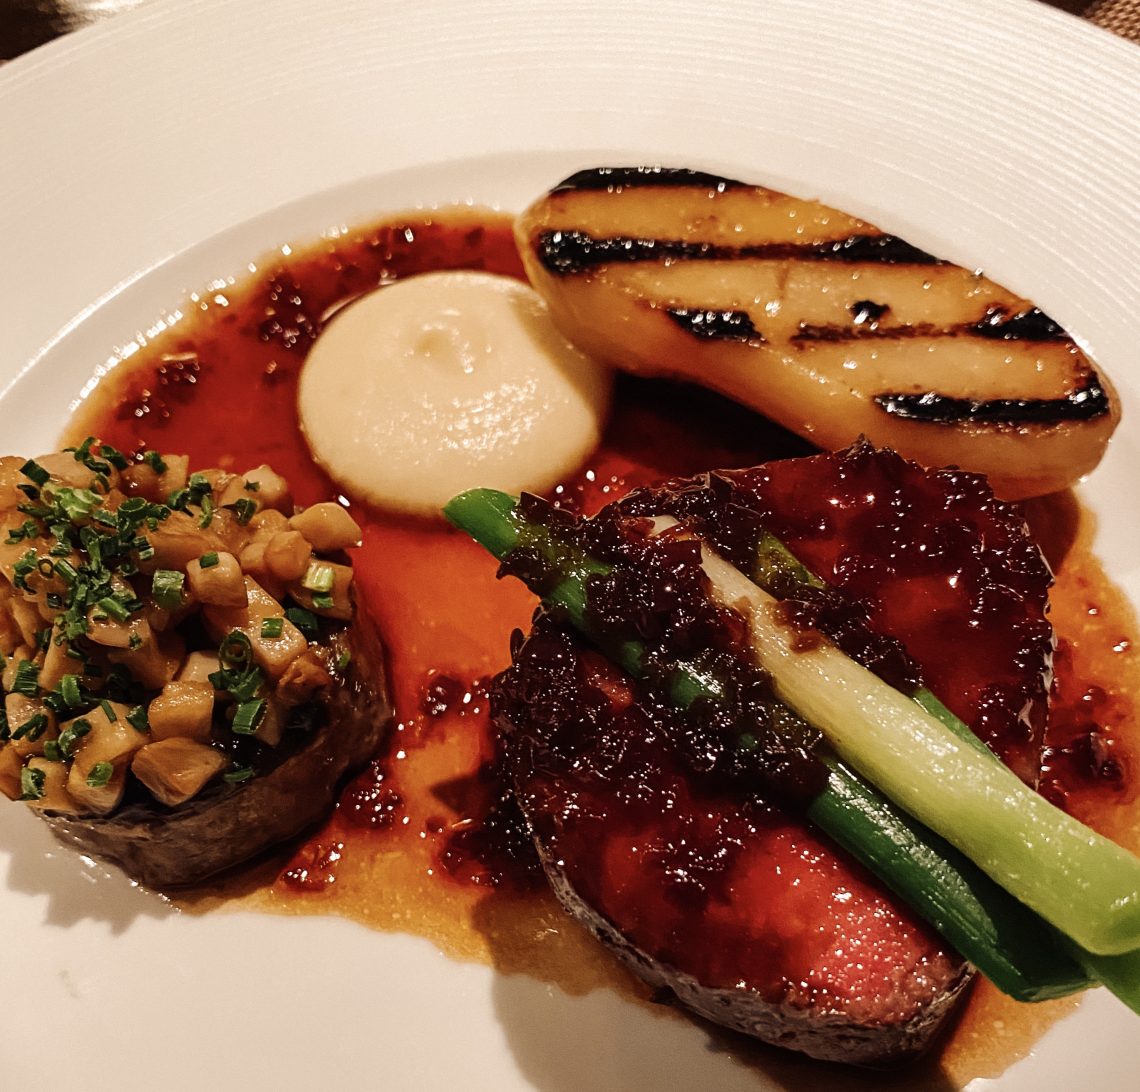 Photograph of the Welsh Beef at Odette's Restaurant, Primrose Hill